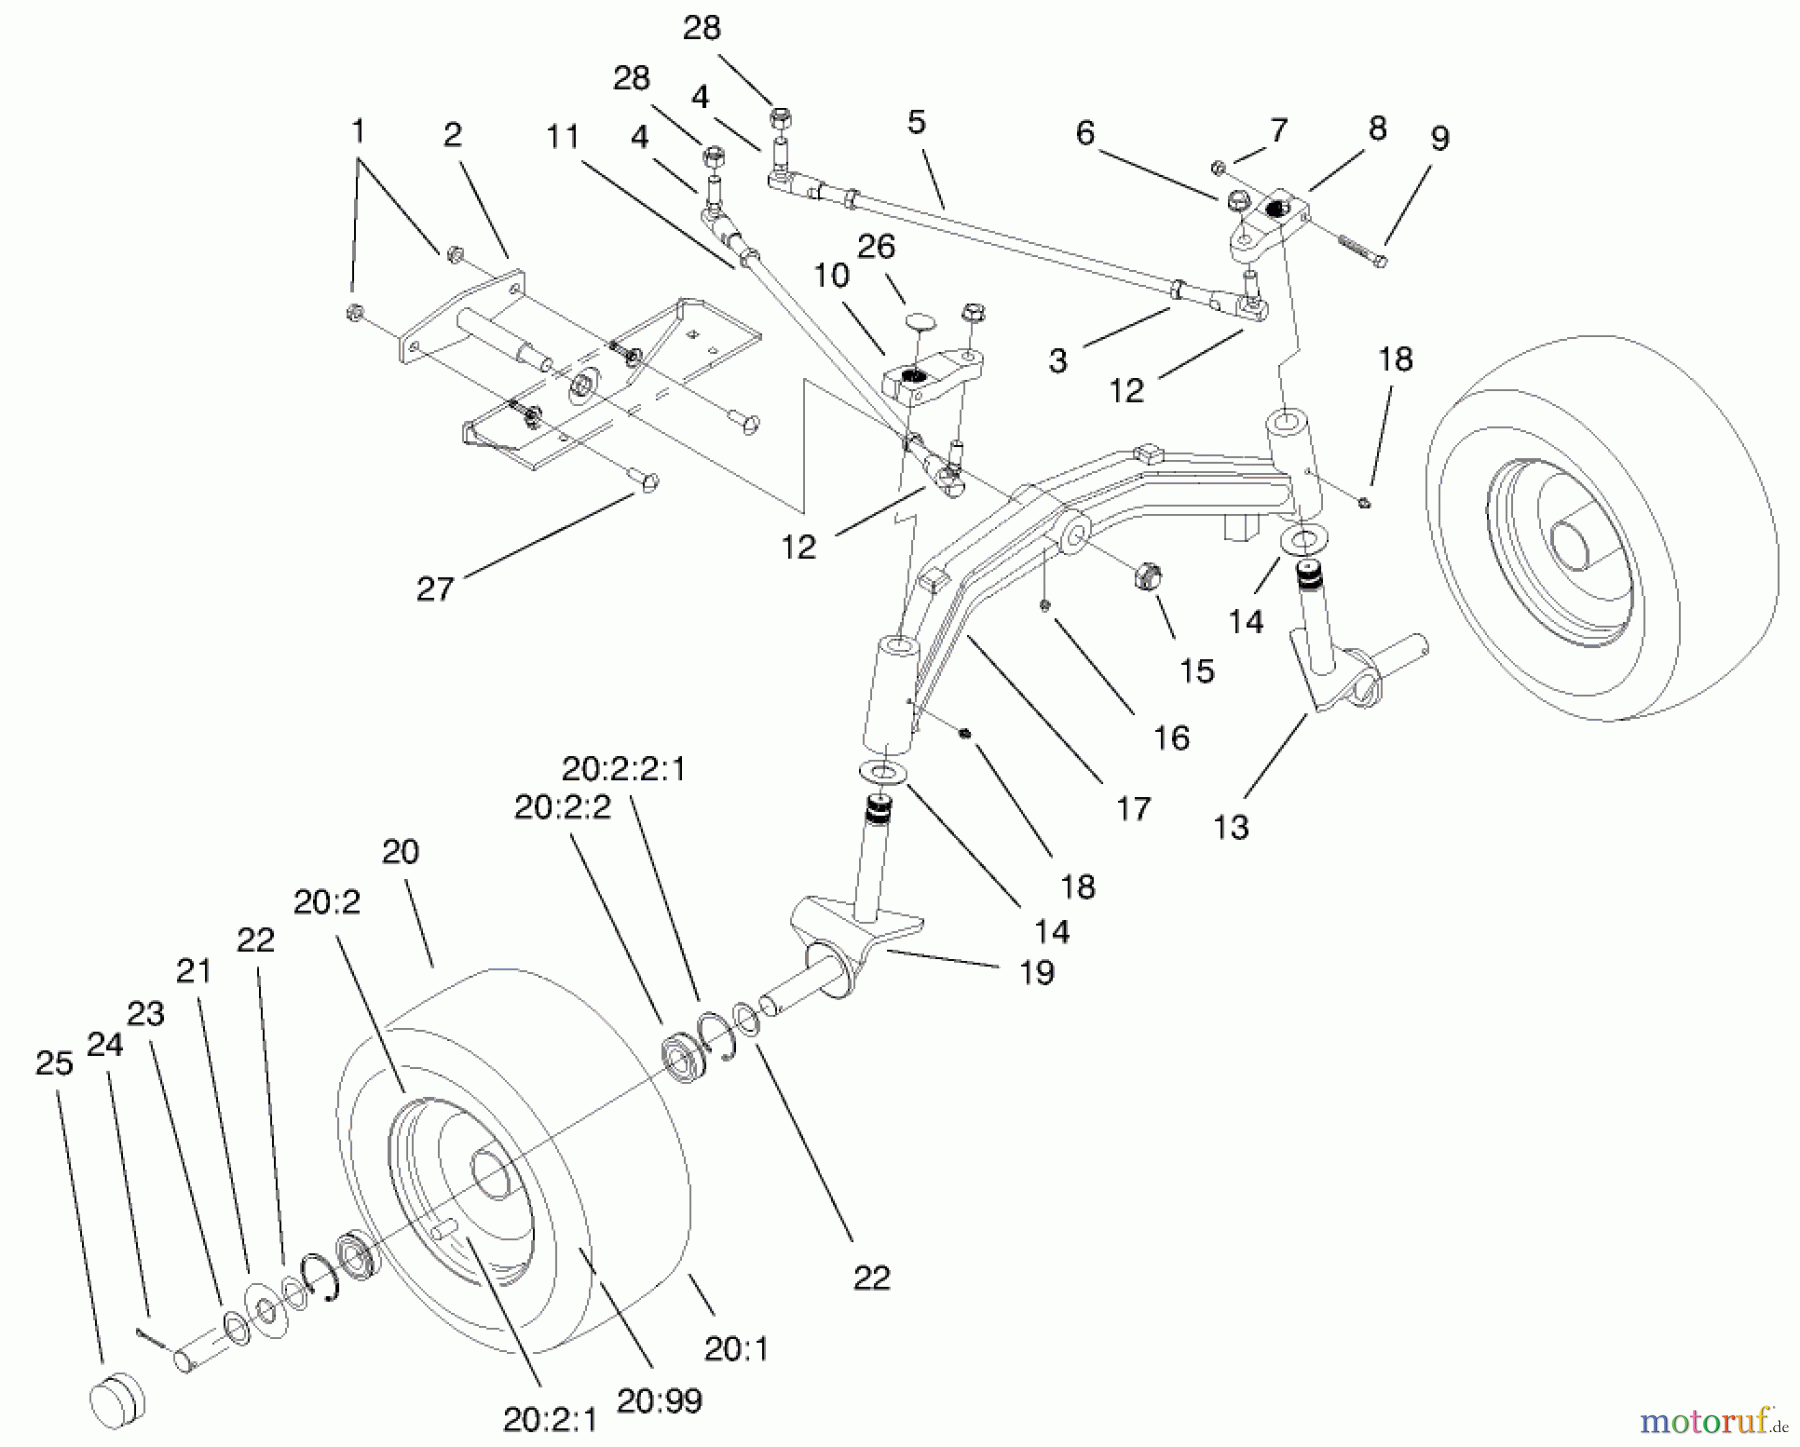  Toro Neu Mowers, Lawn & Garden Tractor Seite 1 73590 (523Dxi) - Toro 523Dxi Garden Tractor, 1999 (9900001-9999999) TIE RODS, SPINDLE, & FRONT AXLE ASSEMBLY